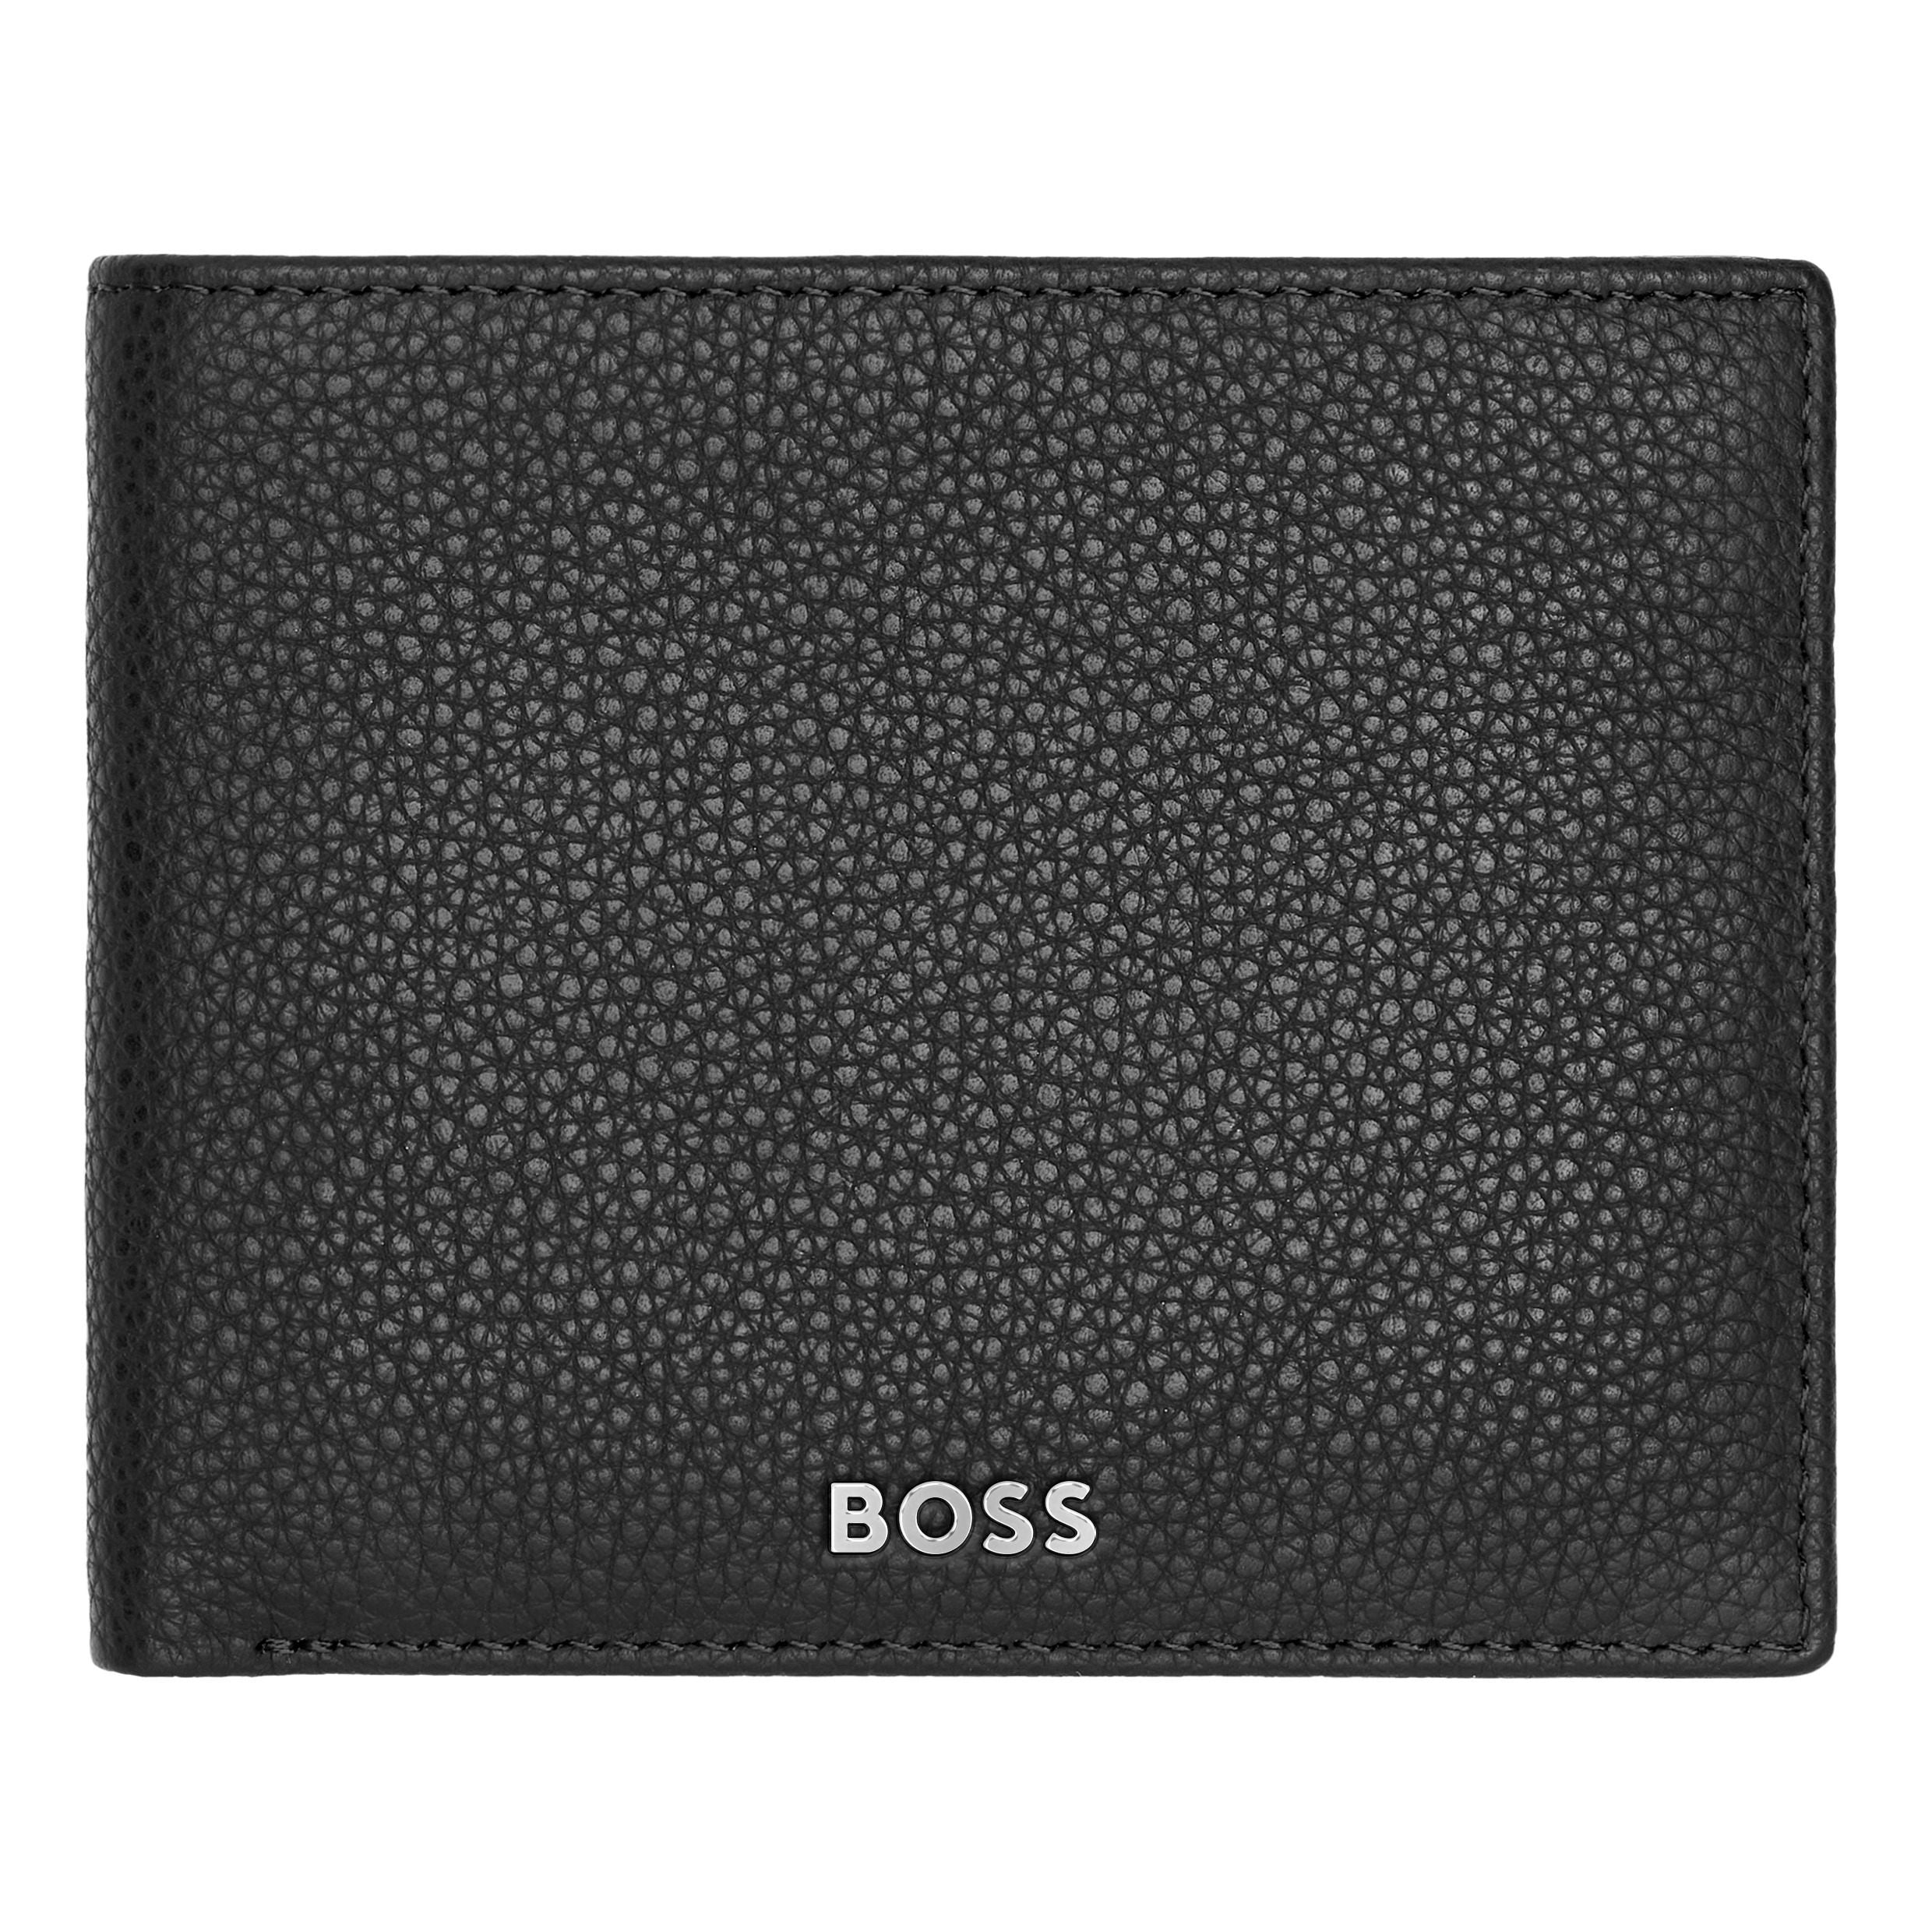 Coin purse Leather Wallet Classic Grained Black